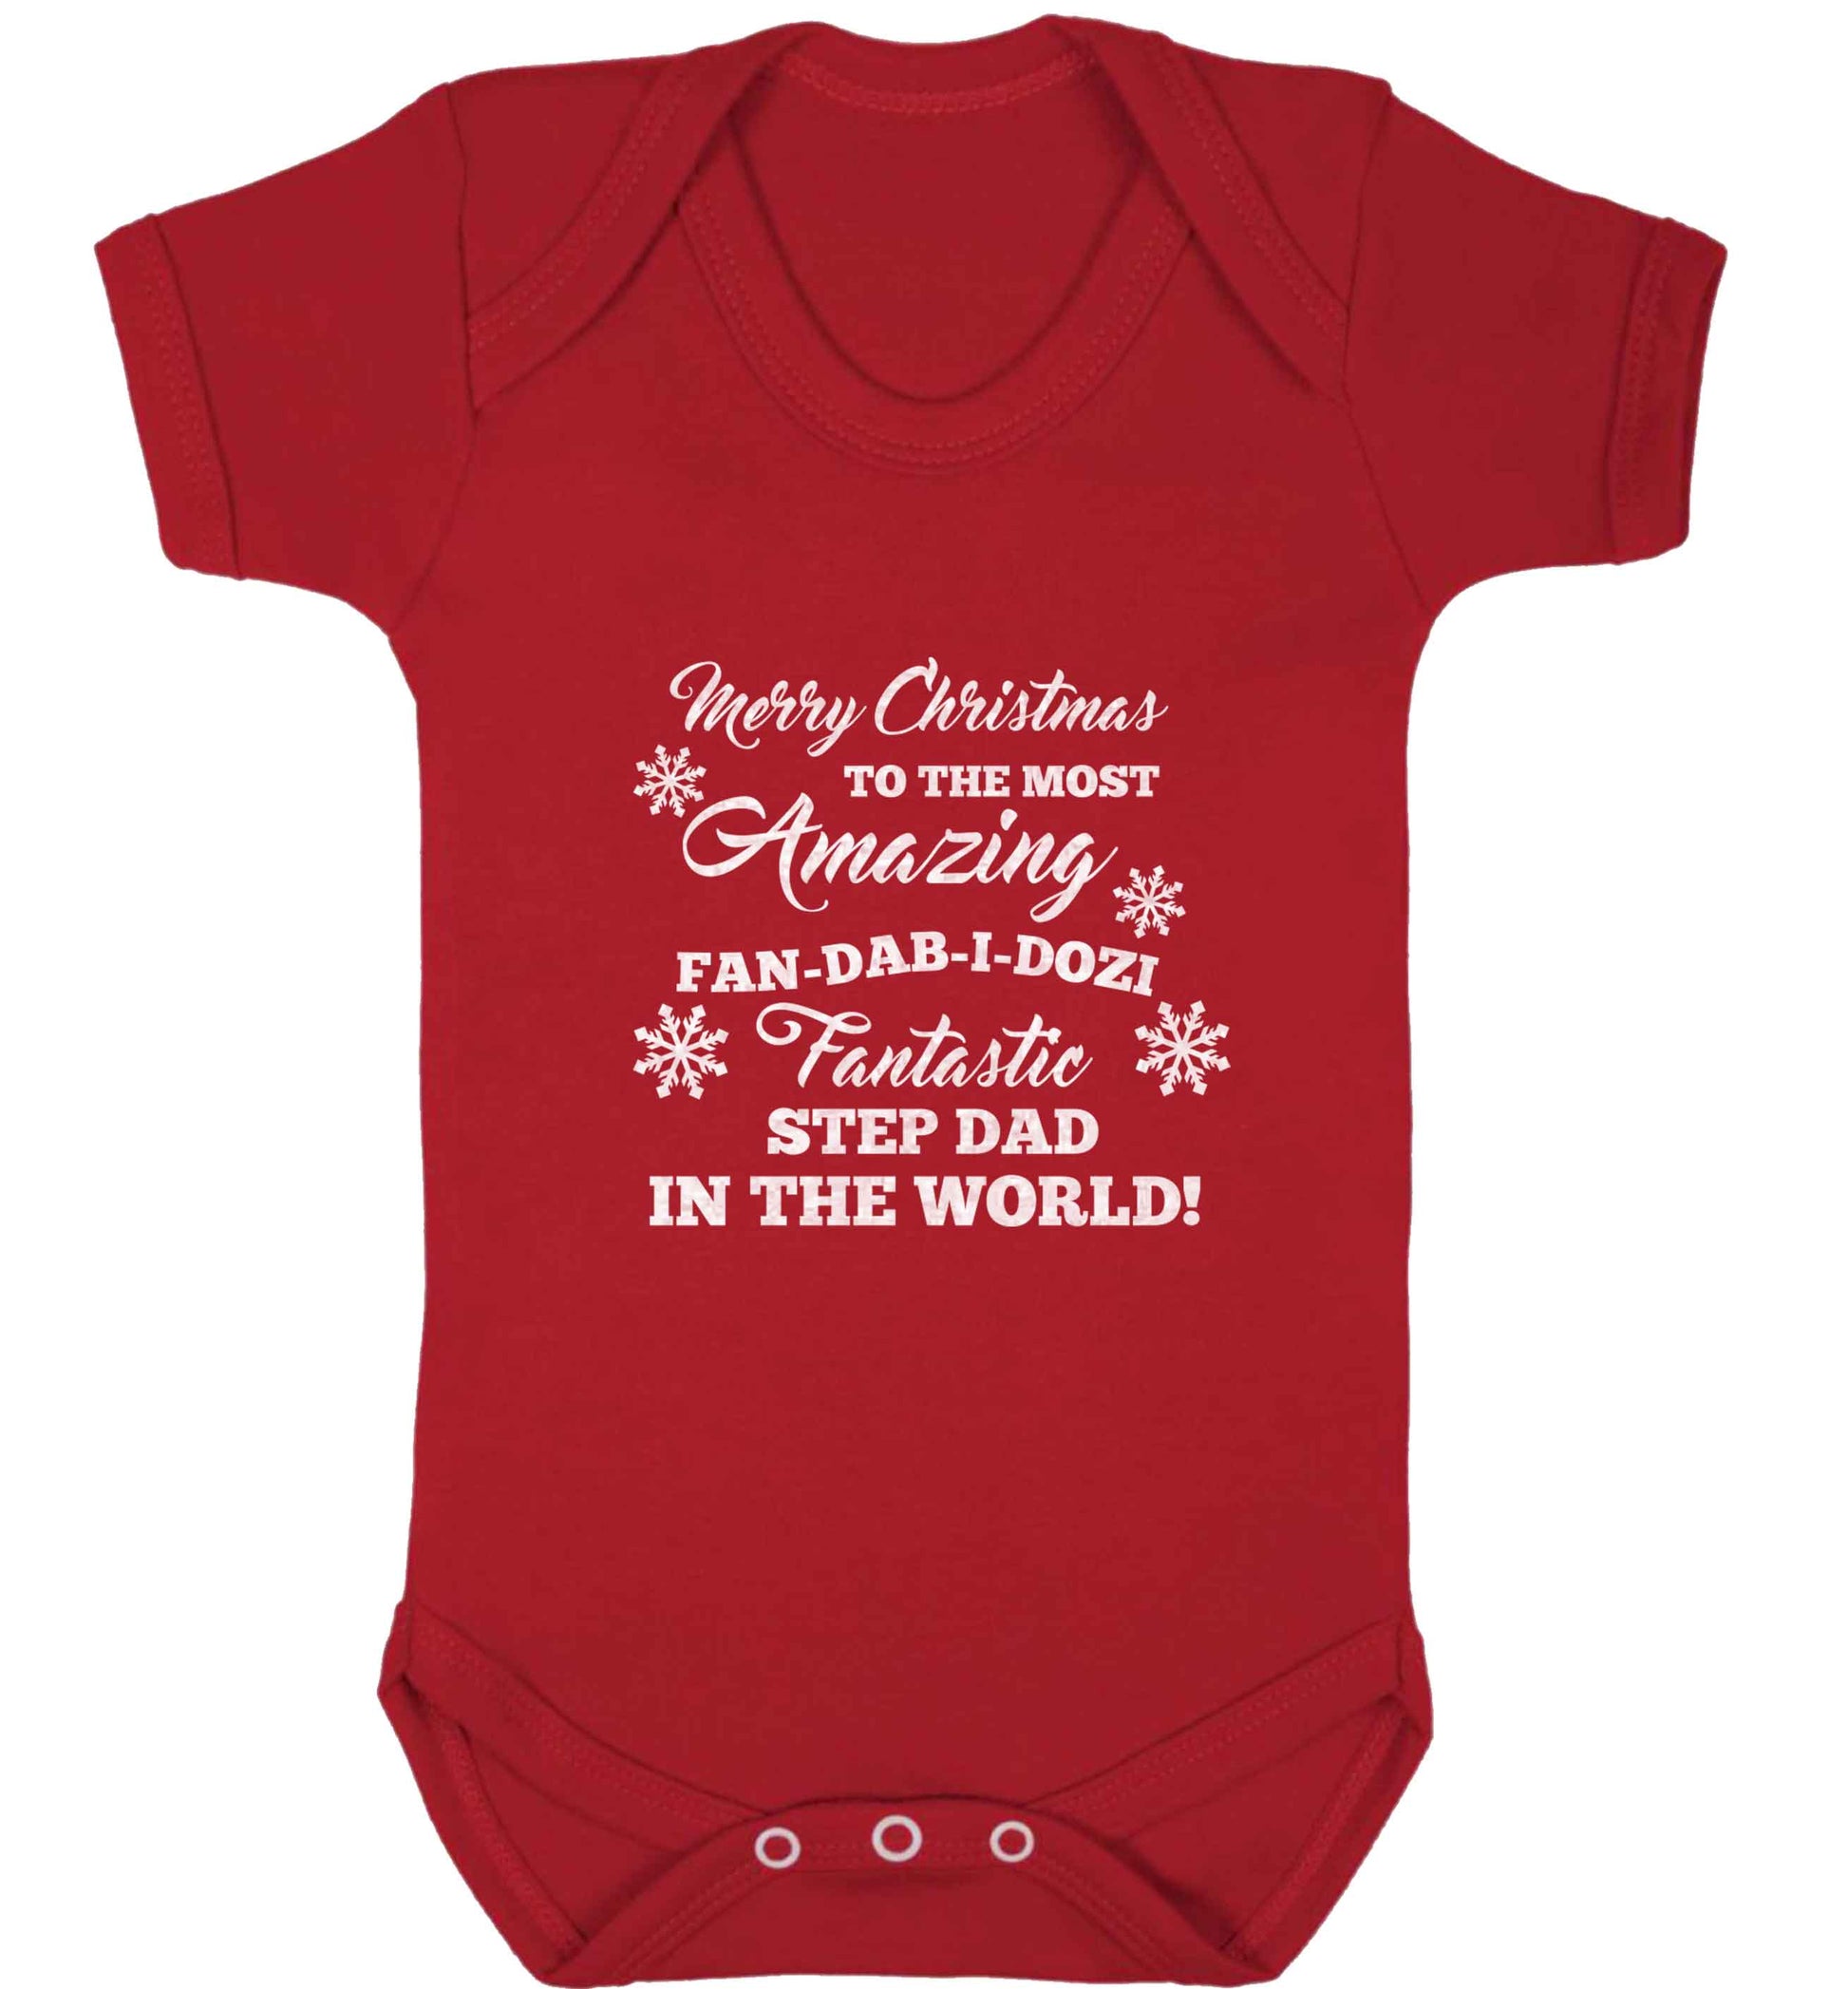 Merry Christmas to the most amazing fan-dab-i-dozi fantasic Step Dad in the world baby vest red 18-24 months